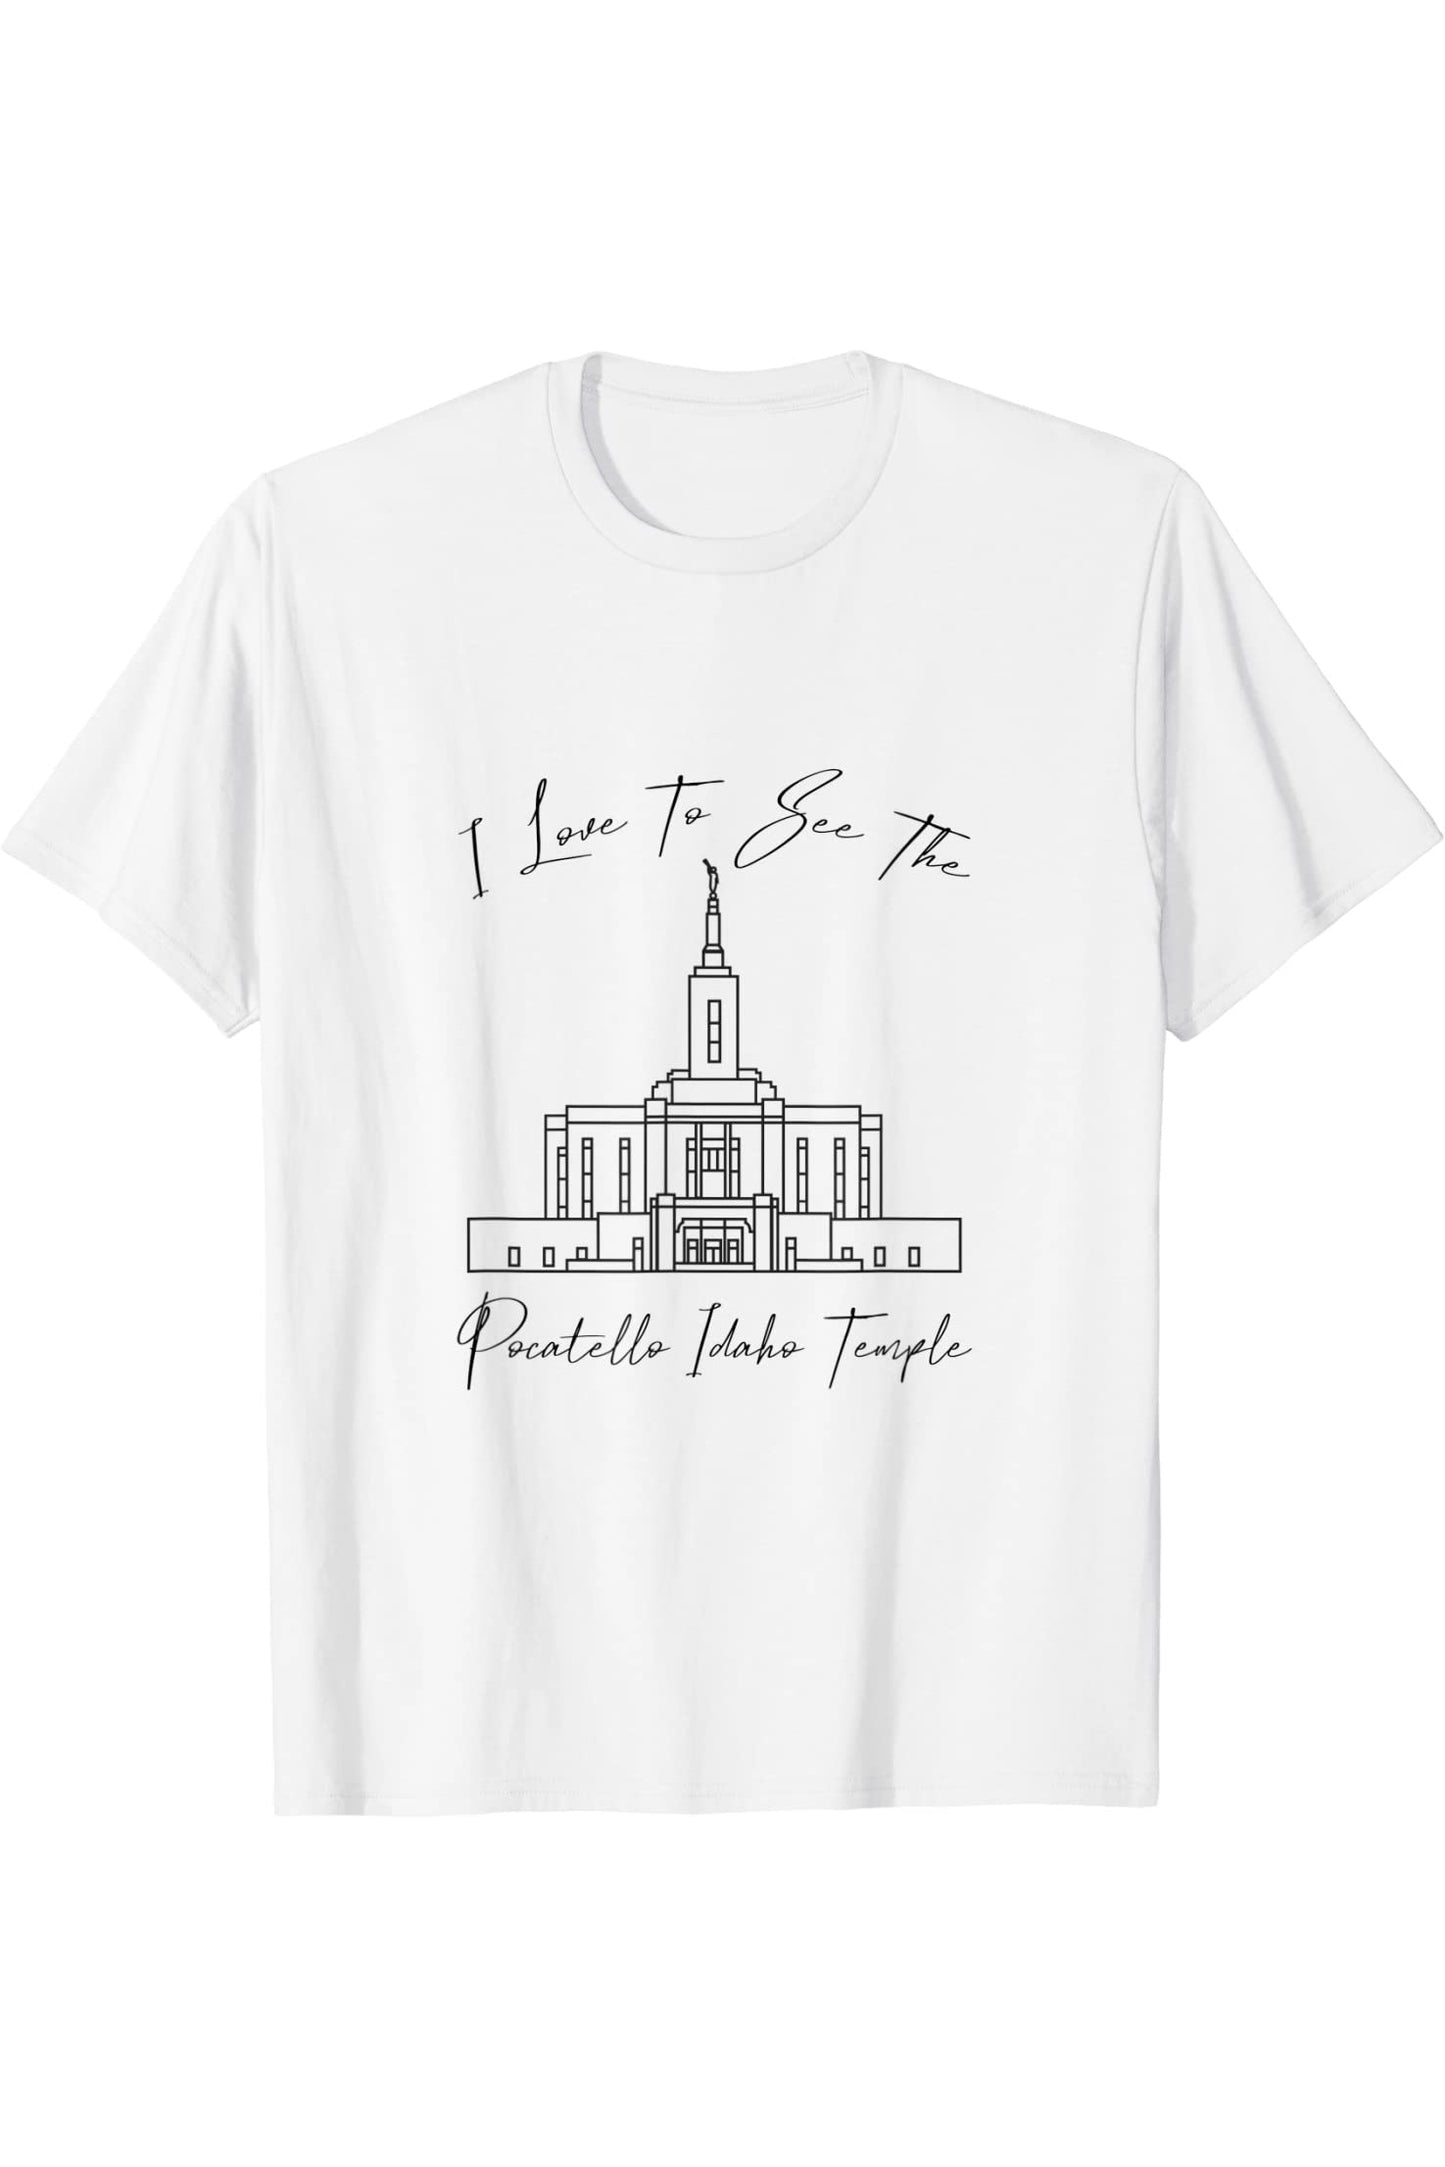 Pocatello ID Temple, I love to see my temple, calligraphy T-Shirt